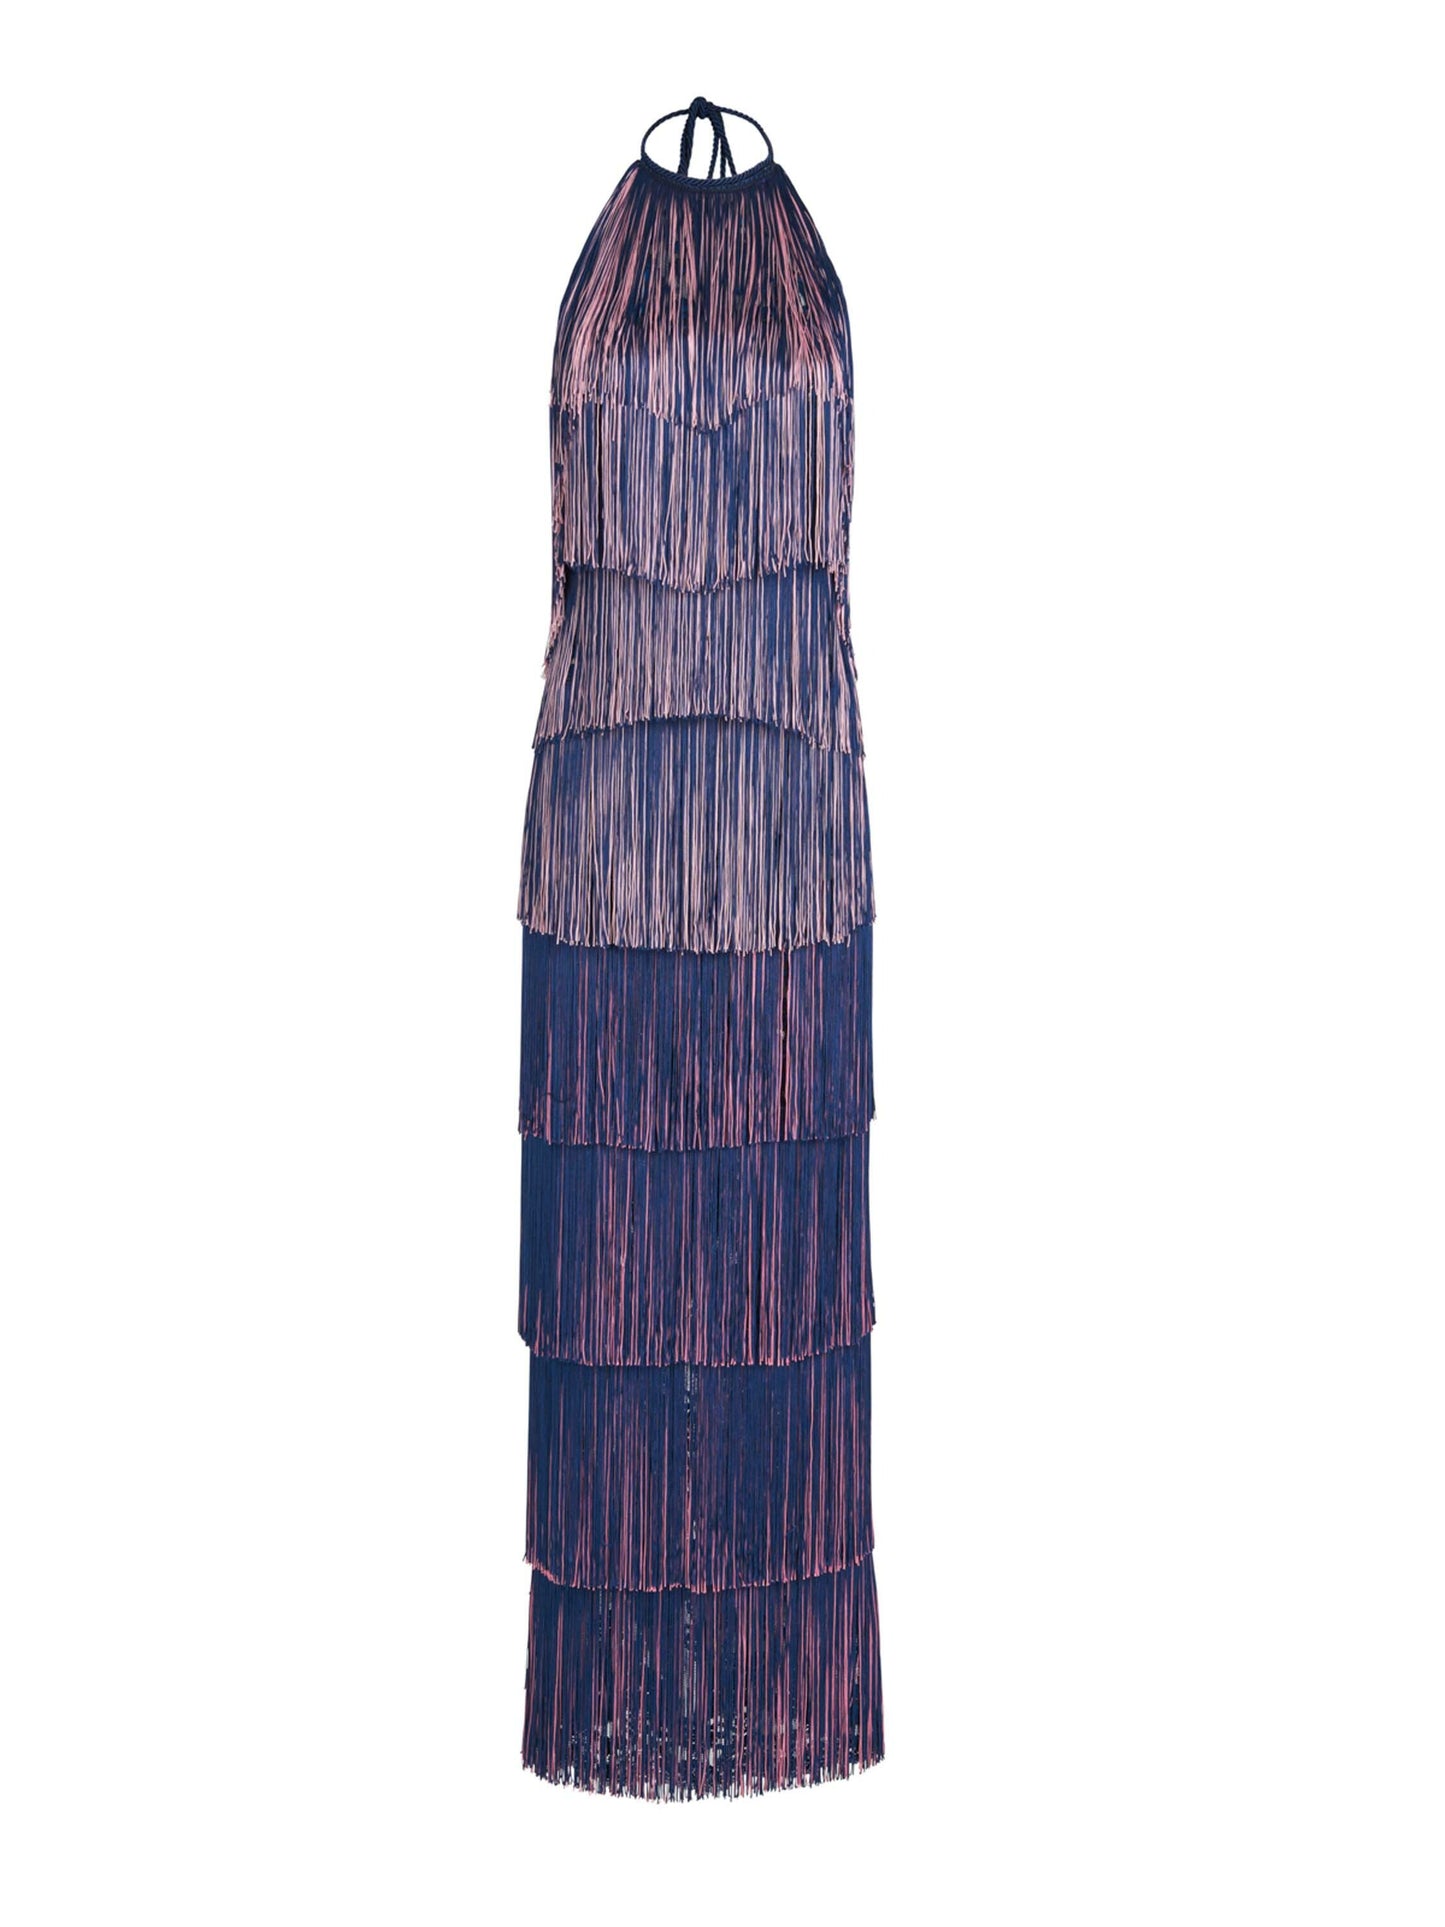 A floor-grazing fringed Paris Dress Navy with a touch of glamour in blue and pink hues.